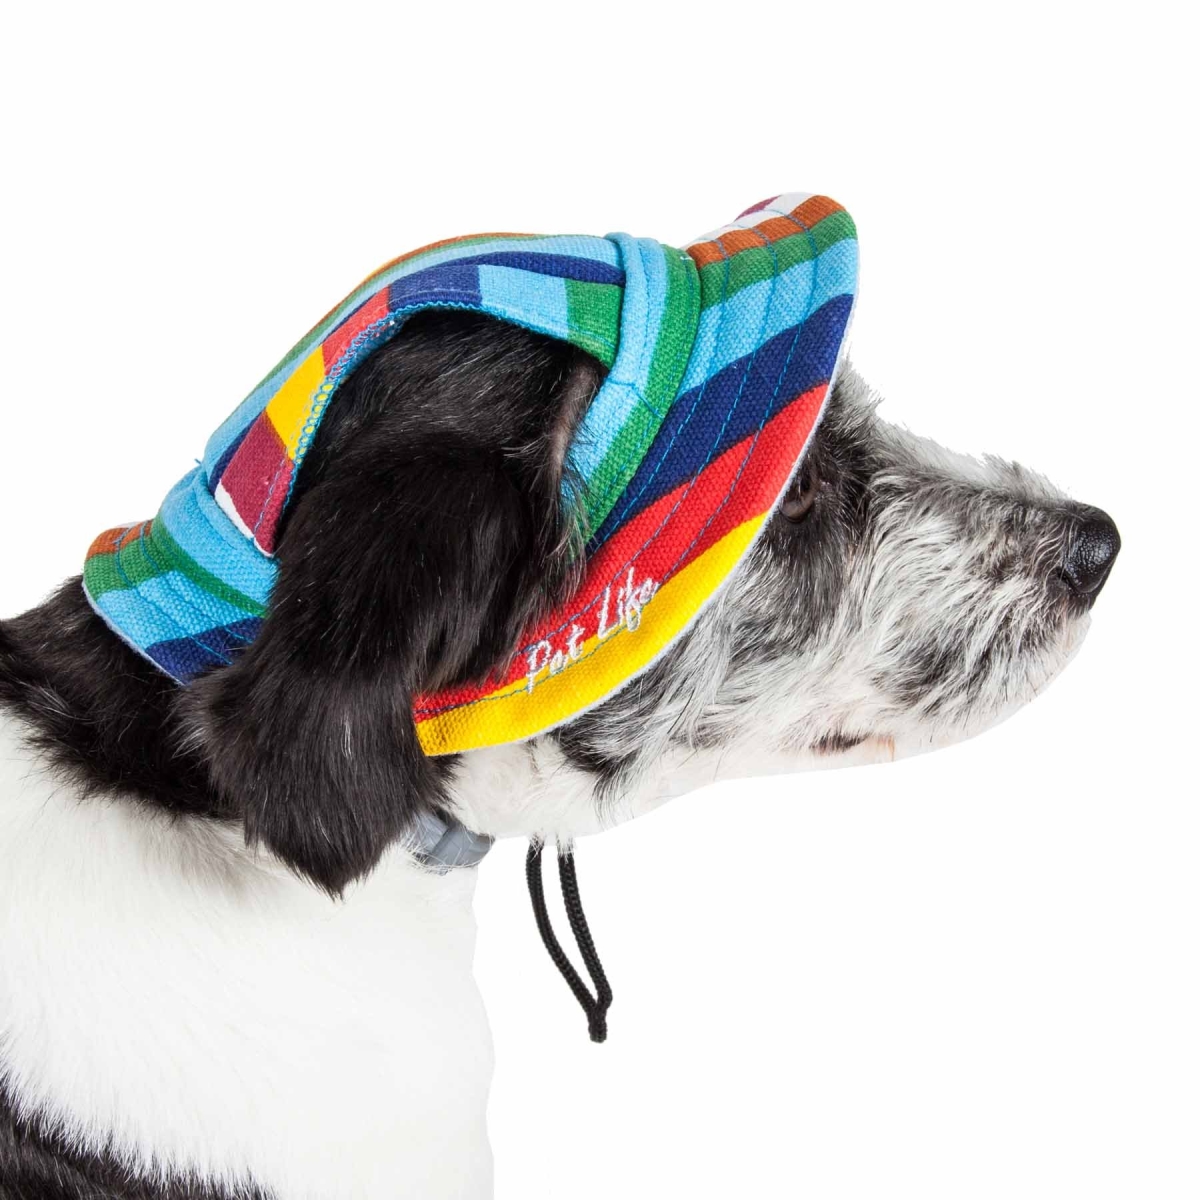 Picture of Pet Life HT7RBMD Colorfur UV Protectant Adjustable Fashion Canopy Brimmed Dog Hat - Rainbow, Medium